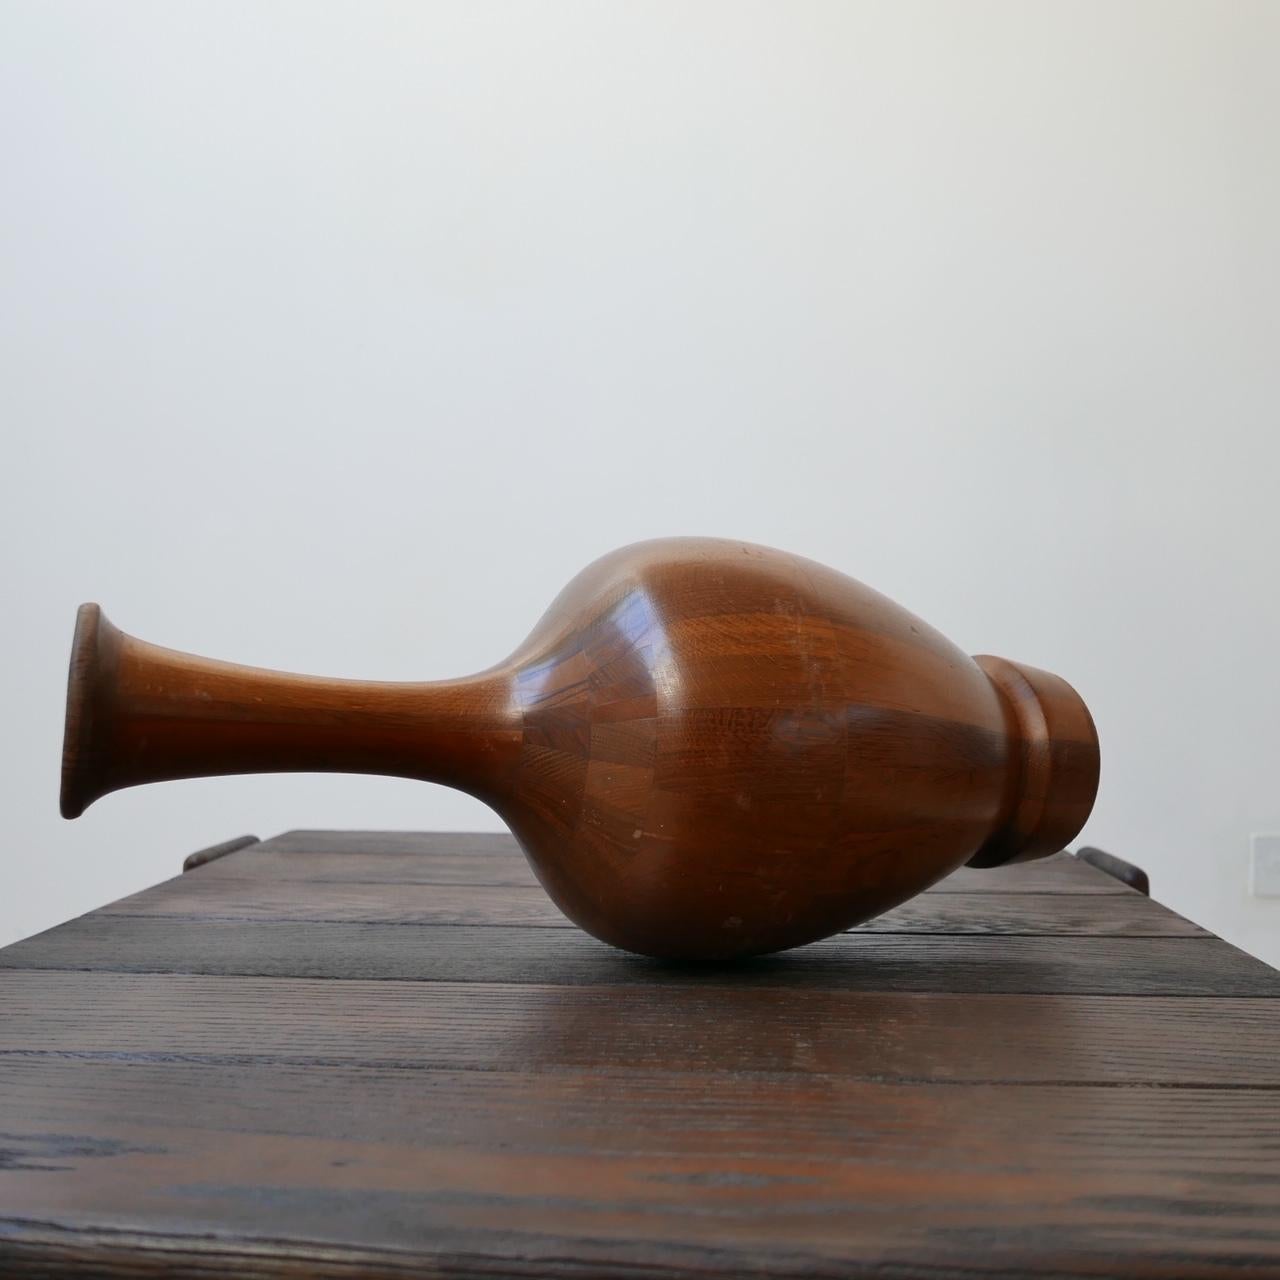 A turned wooden specimen vase by master craftsman Maurice Bonami (1929), Belgium.

Intricately constructed from many different specimens of wood and turned on a lathe. 

Produced between 1965 and 1975.

Commonly misattributed to De